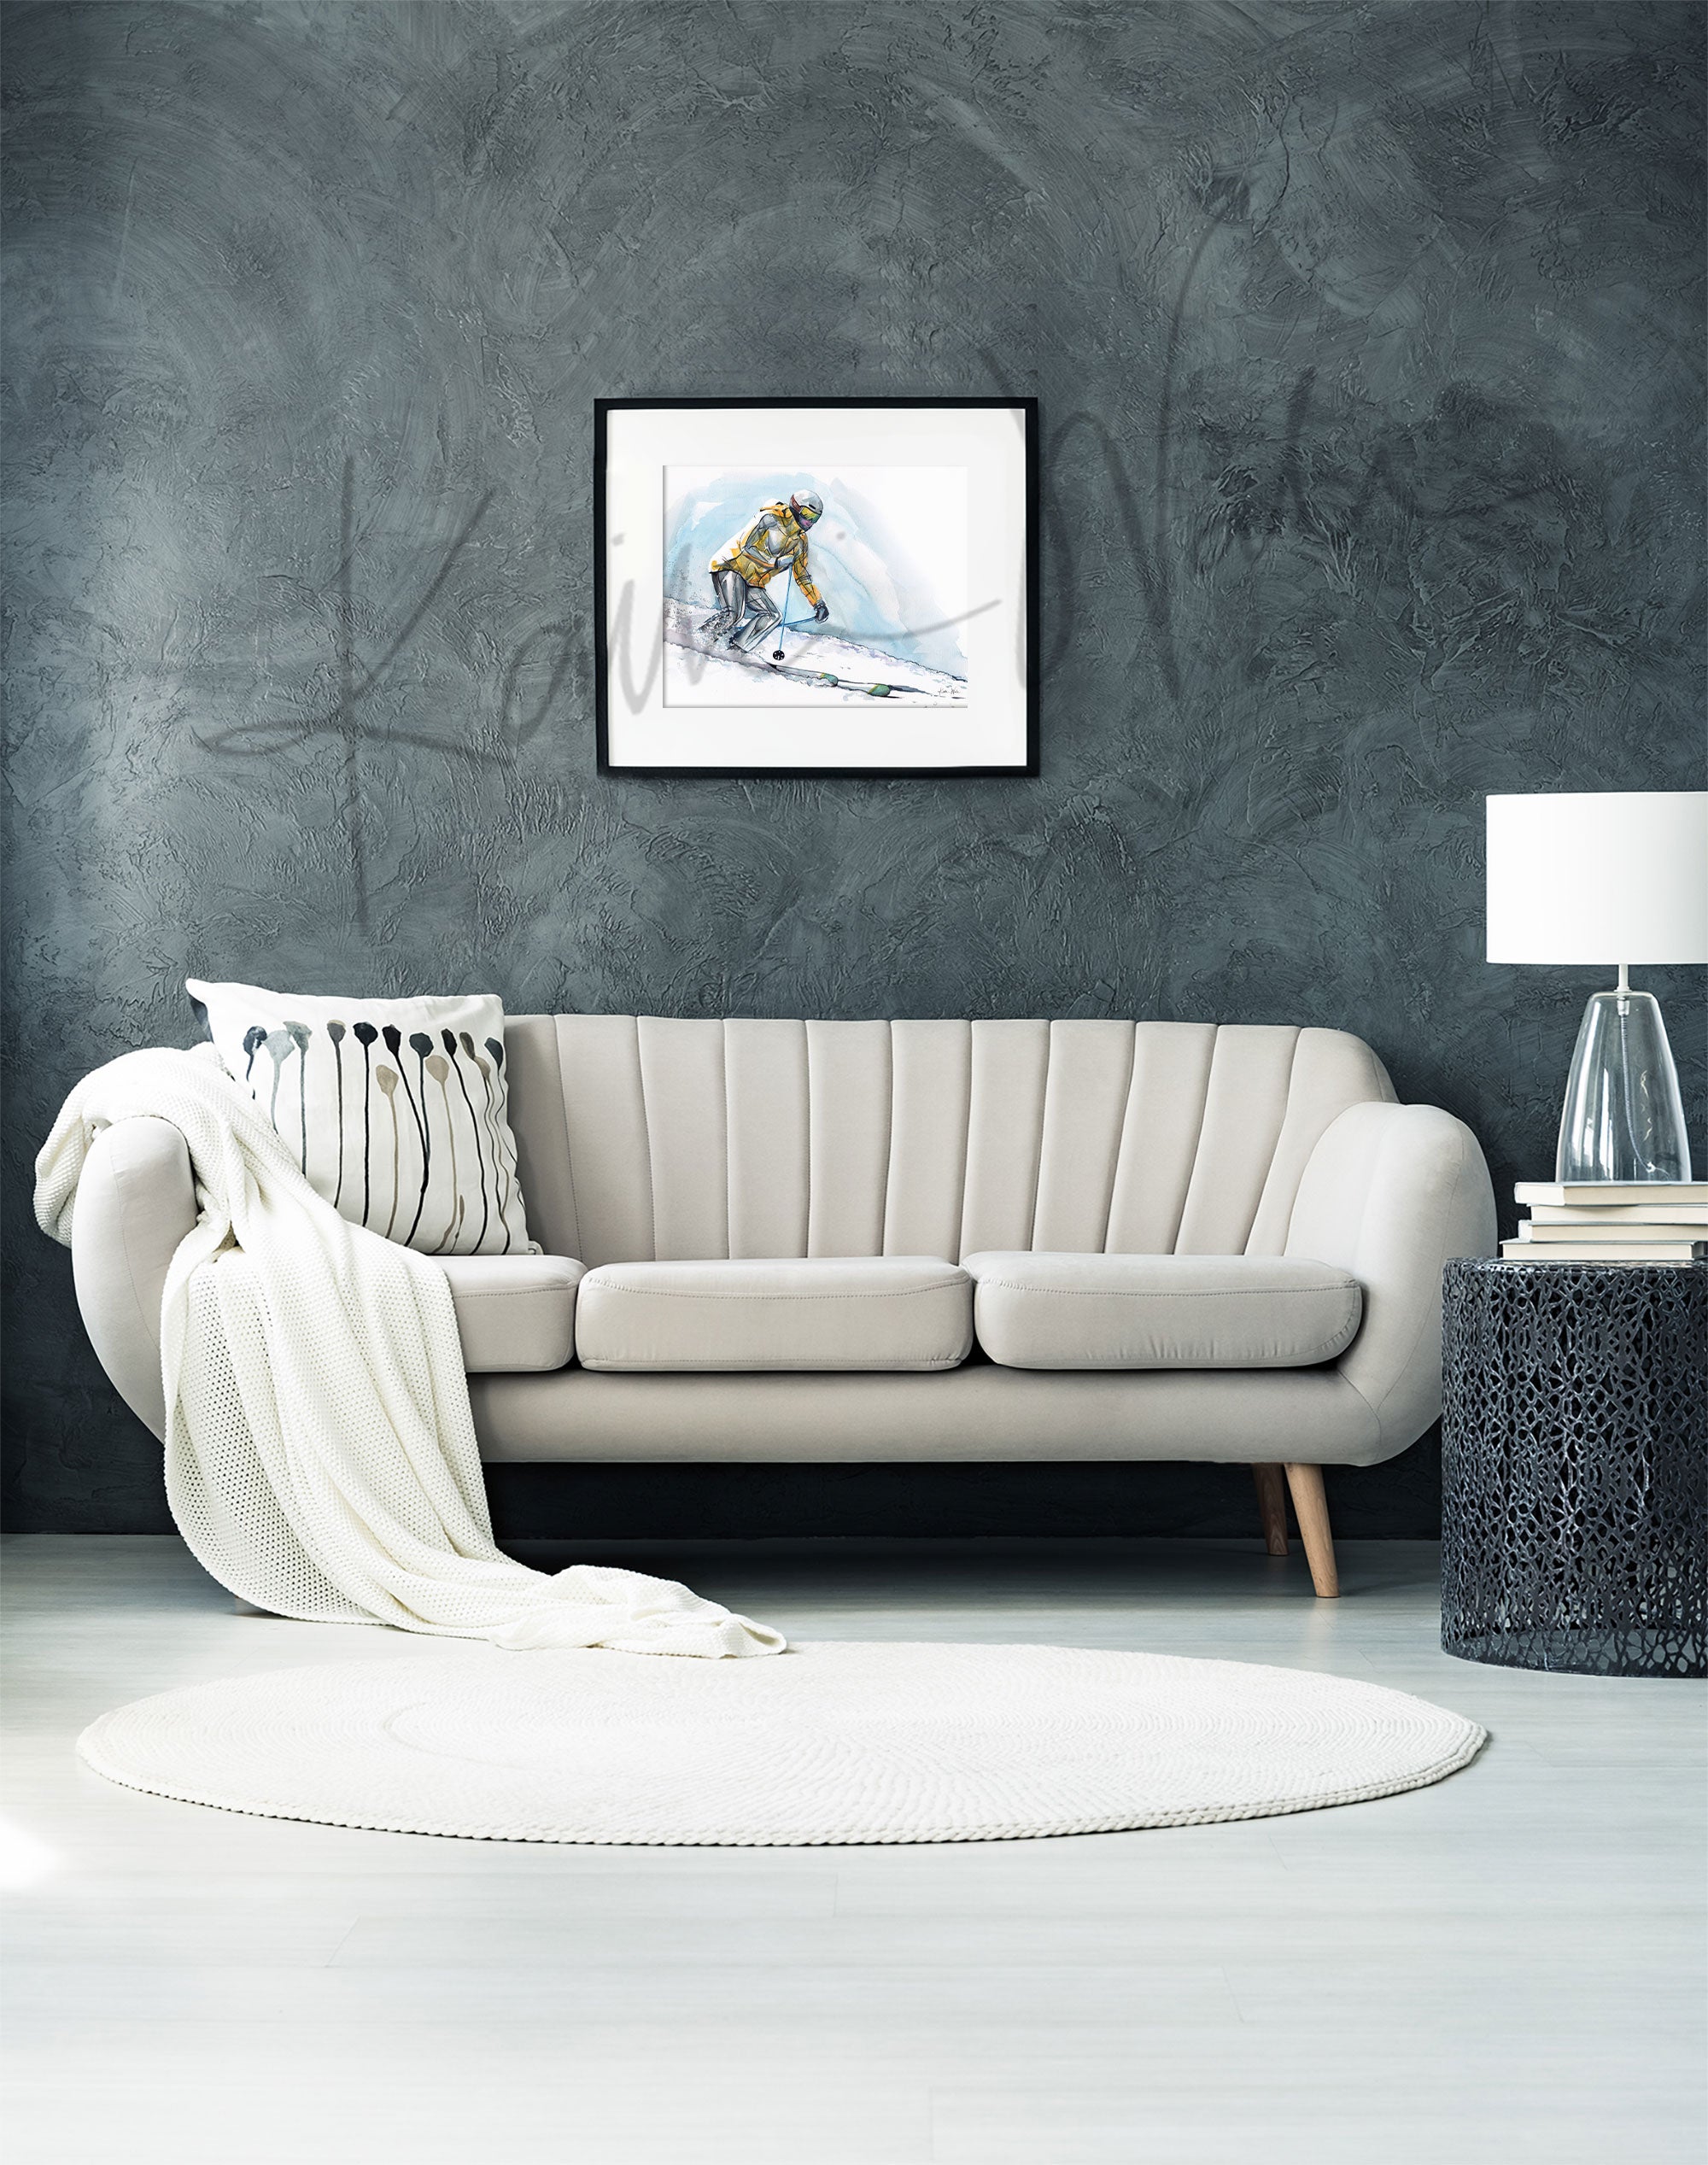 Framed watercolor painting of a skier going down a ski hill with their muscle anatomy showing under their clothing. The painting is hanging over a white couch.